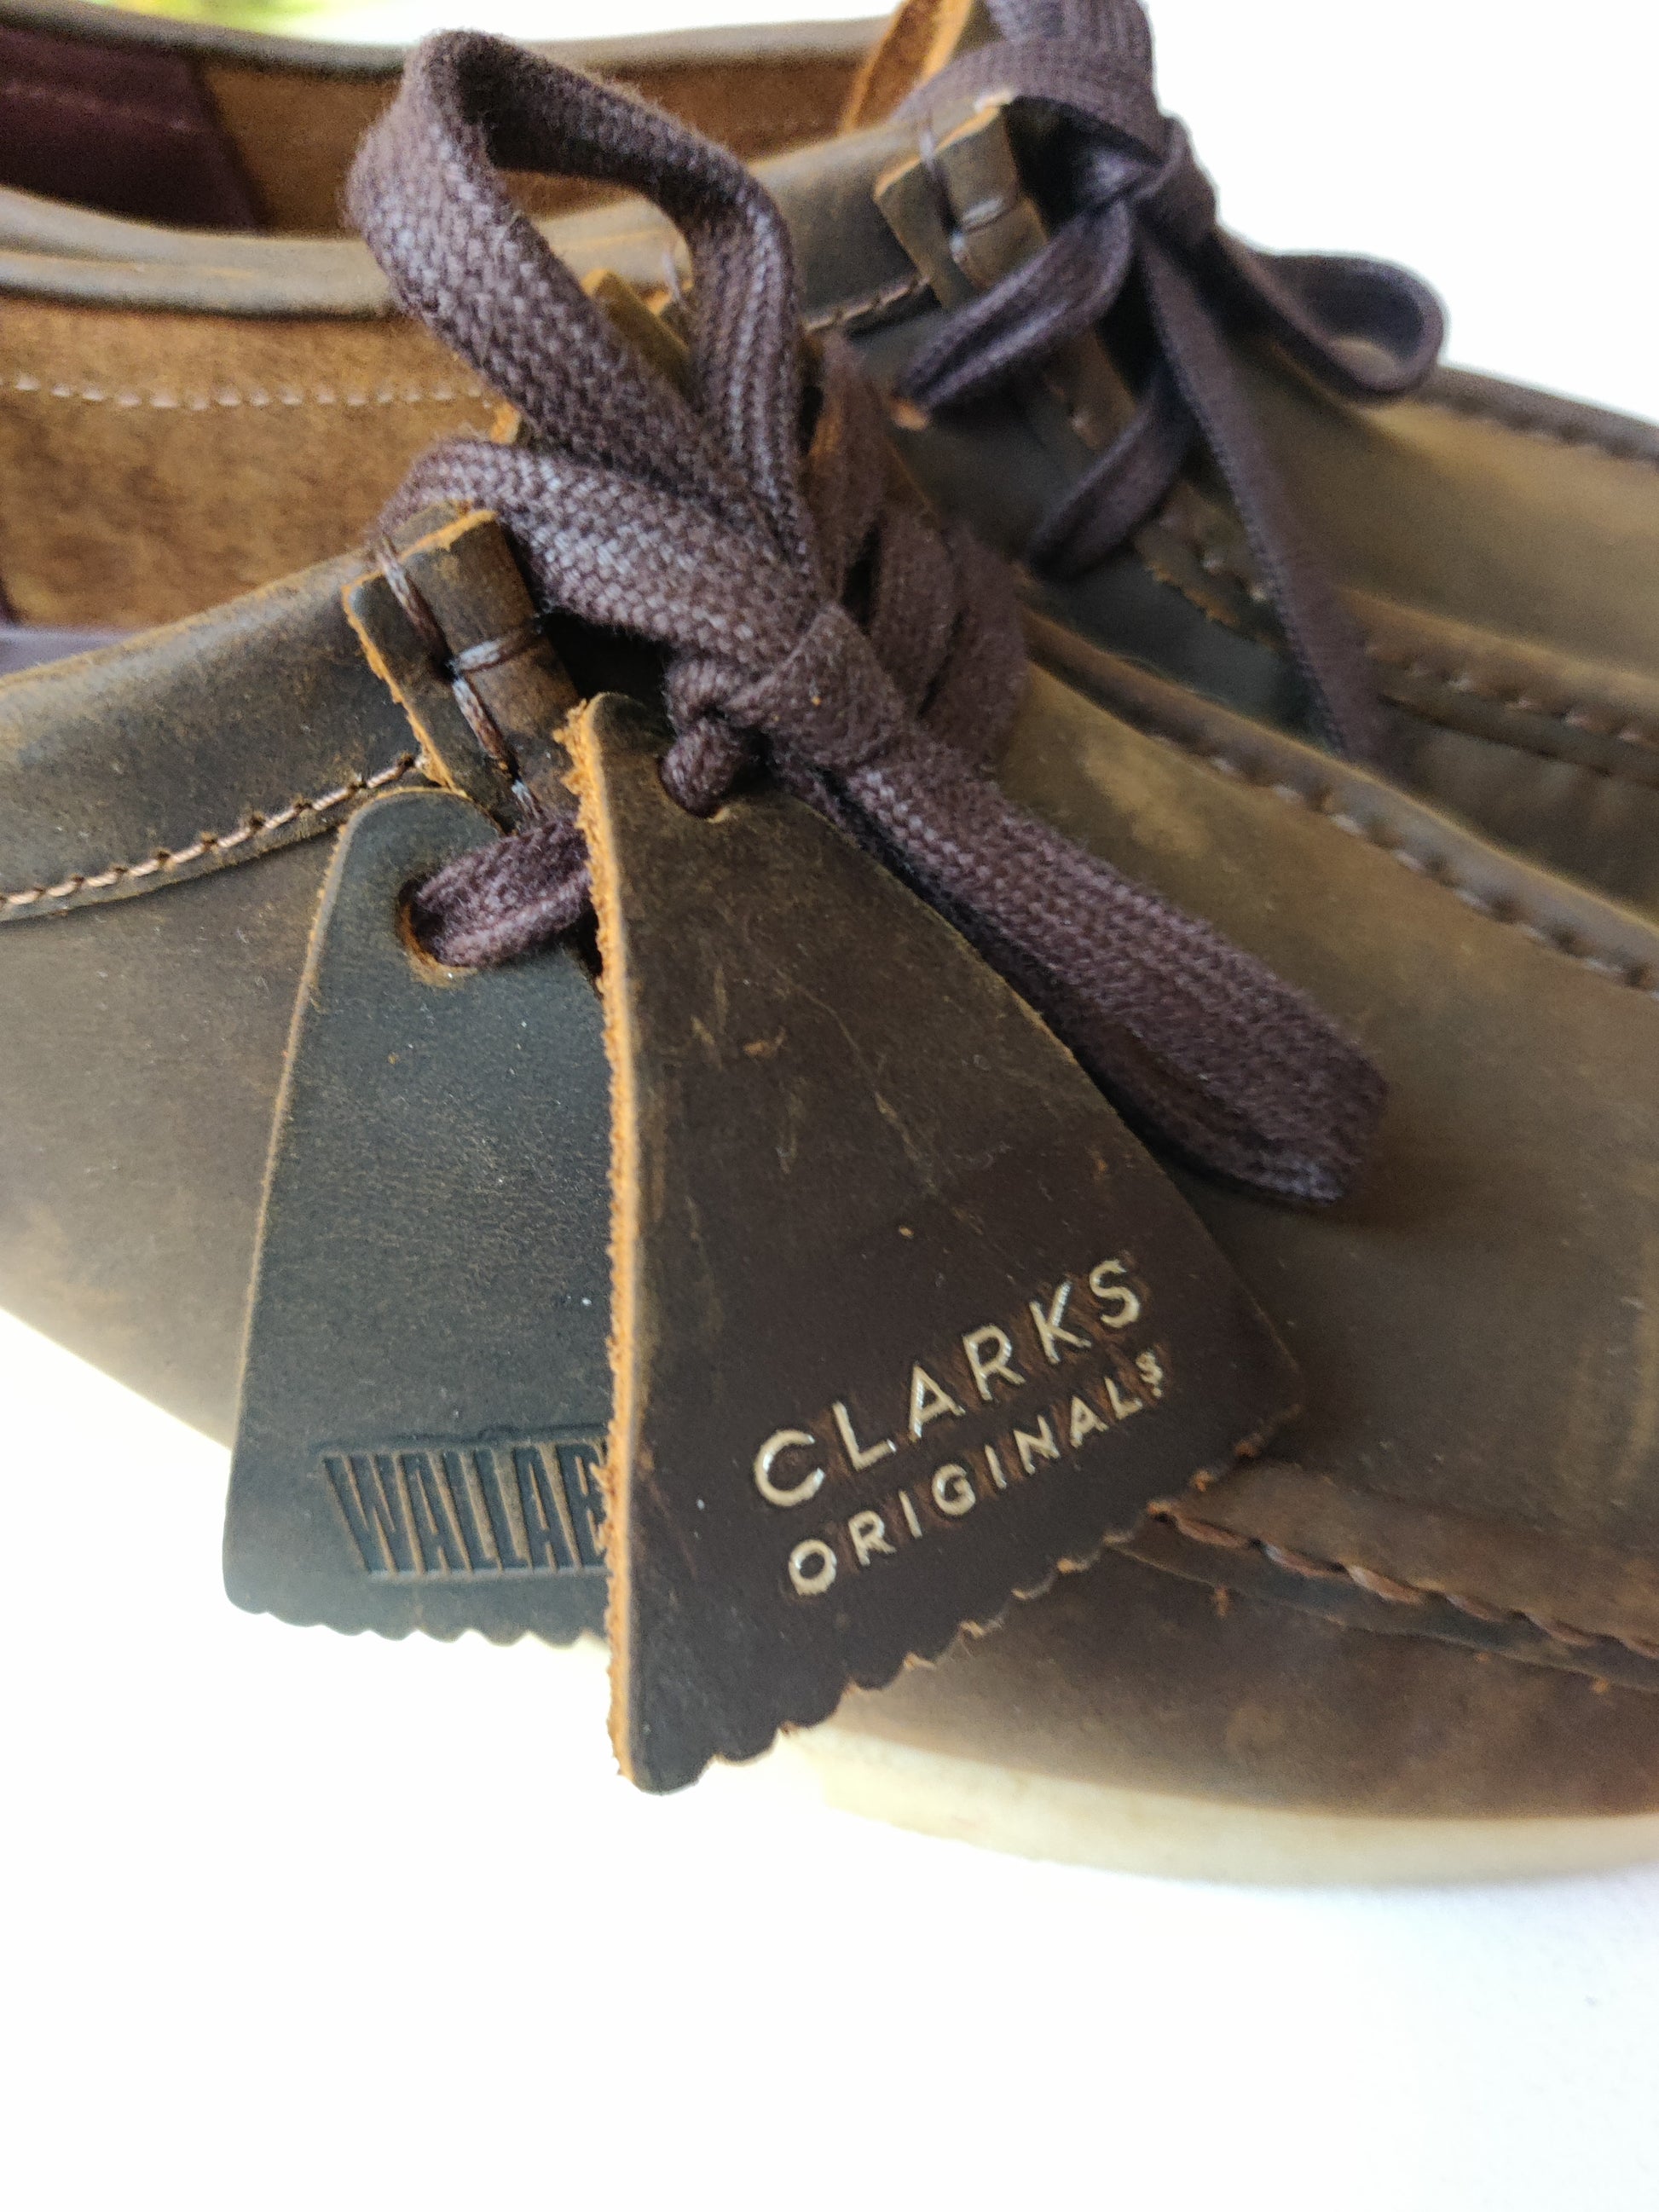 Wallabees brown